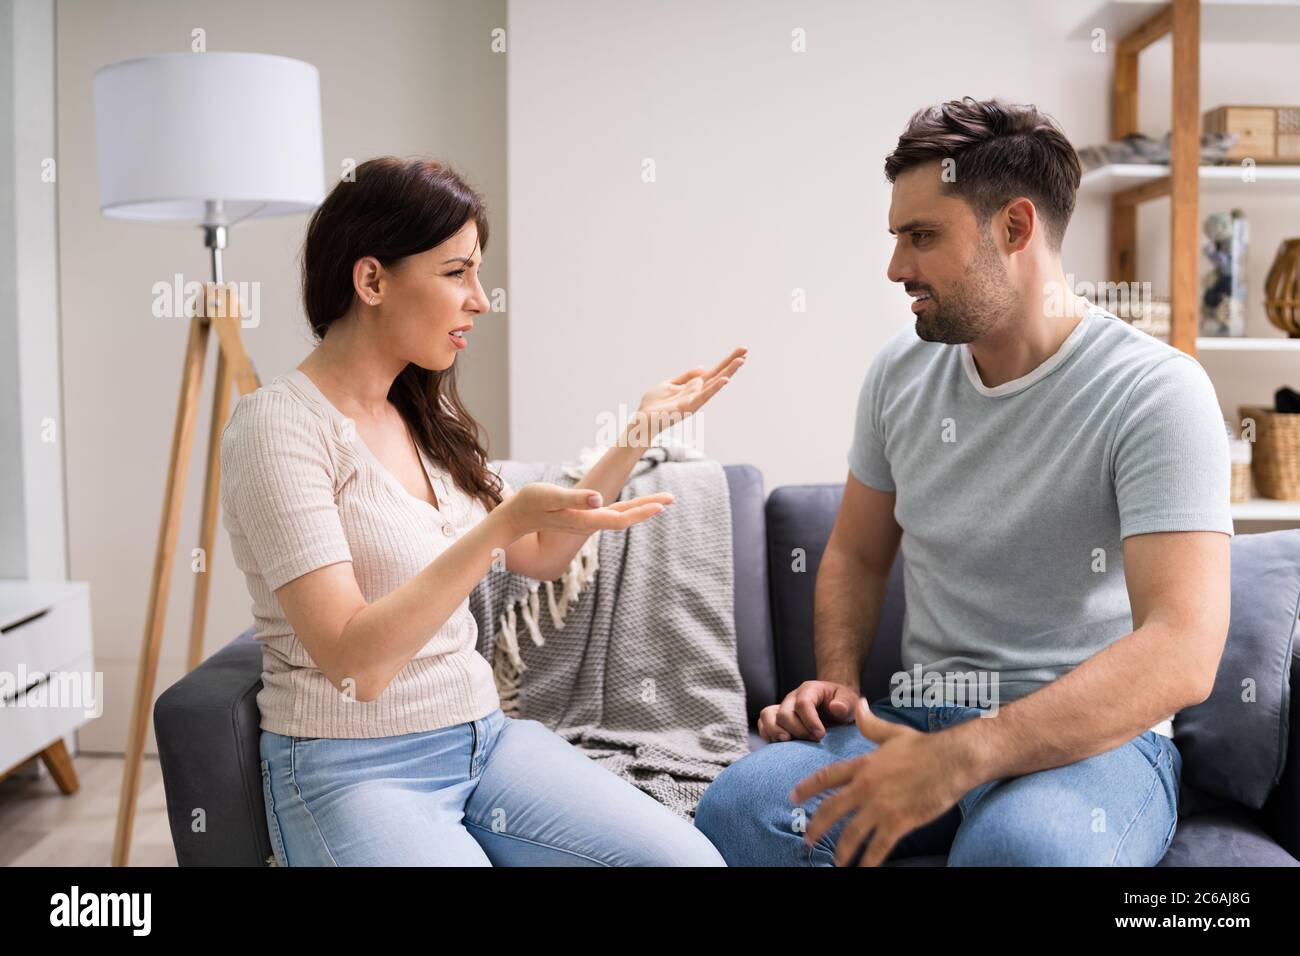 Sad Couple Infidelity Problems. Woman Dispute And Arguing Stock Photo